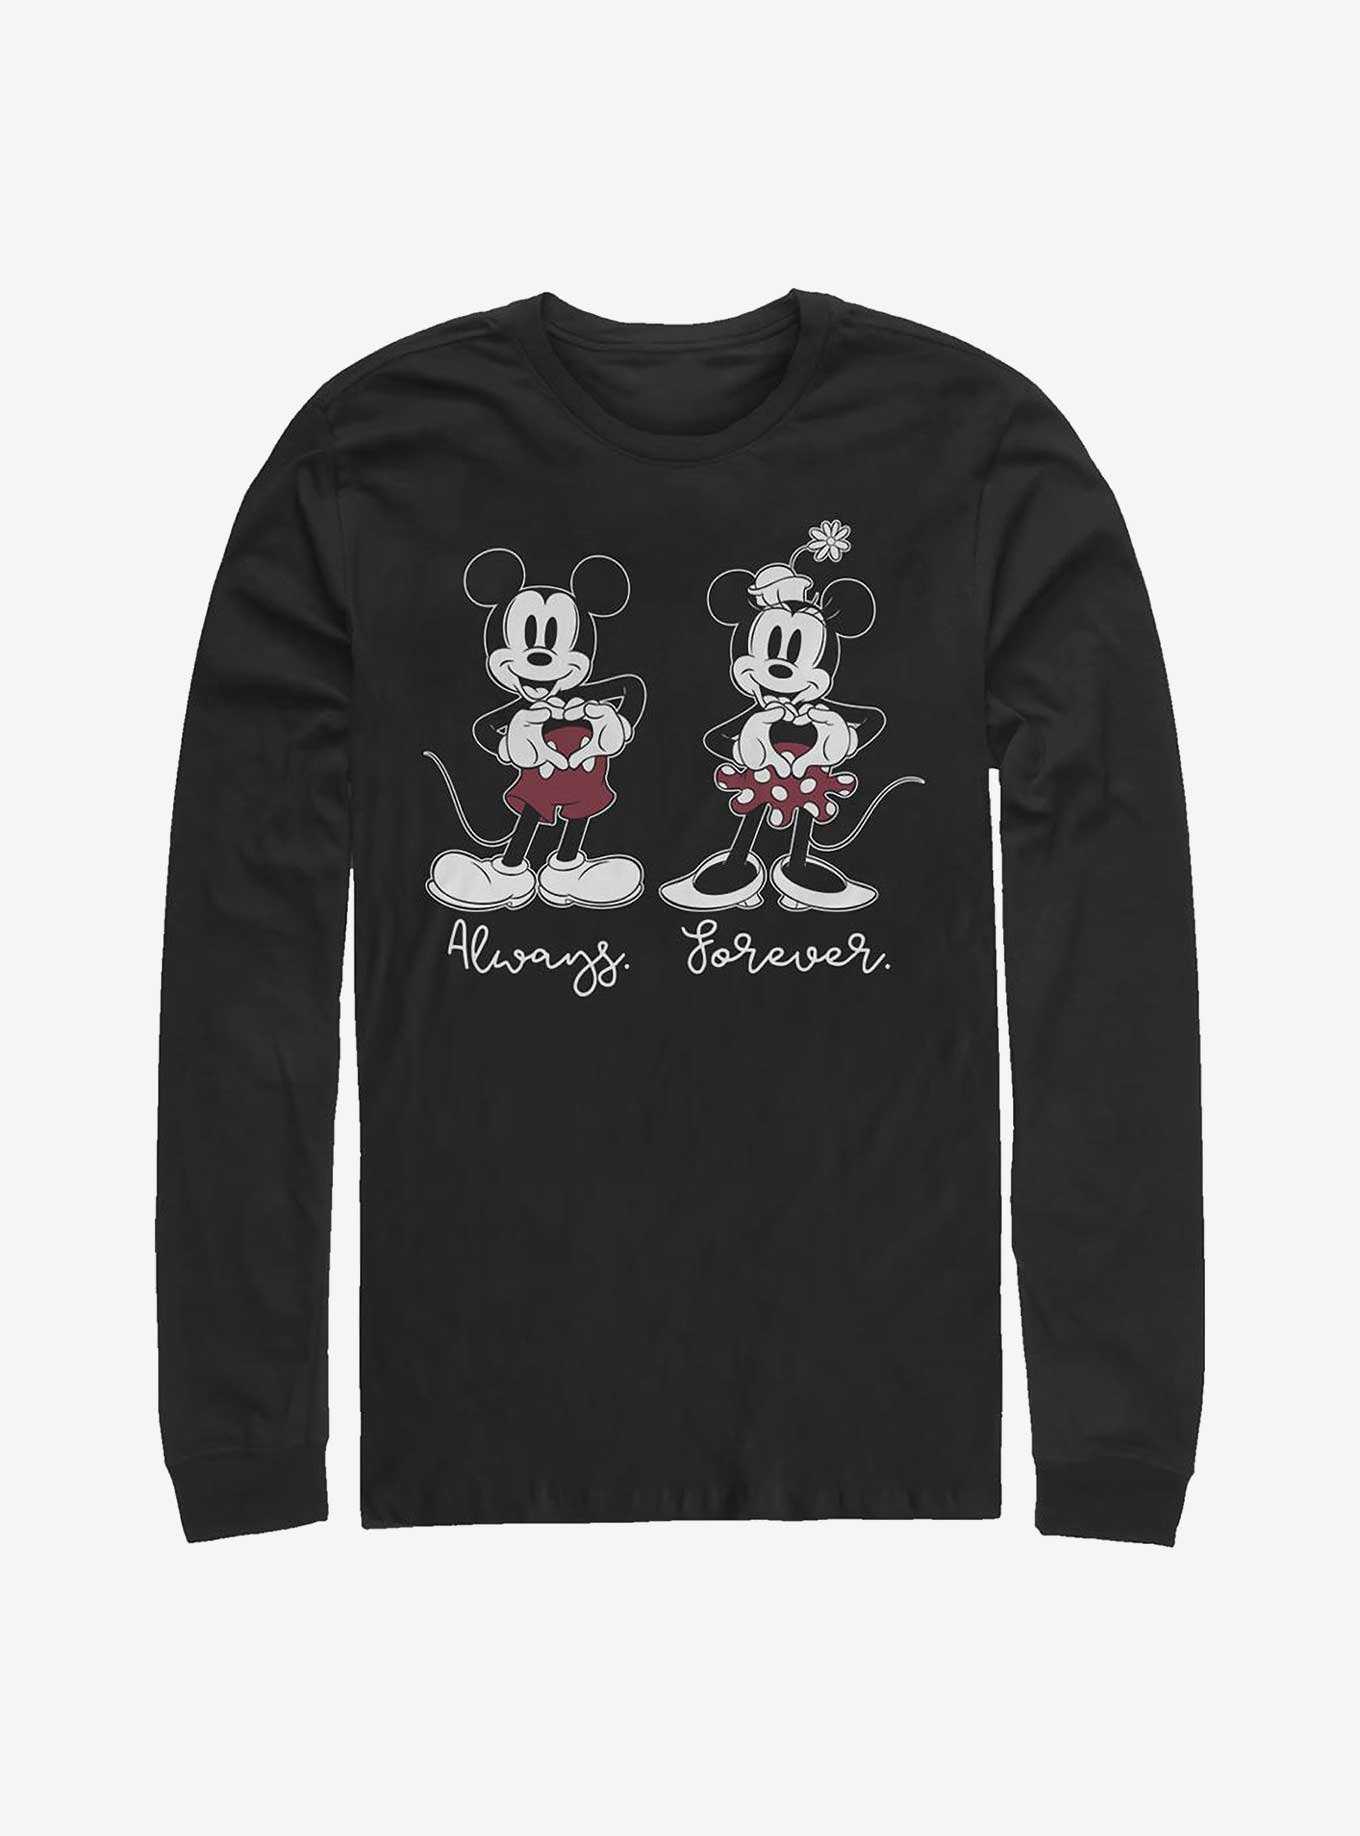 Disney Mickey Mouse & Minnie Mouse Always Forever Long-Sleeve T-Shirt, , hi-res